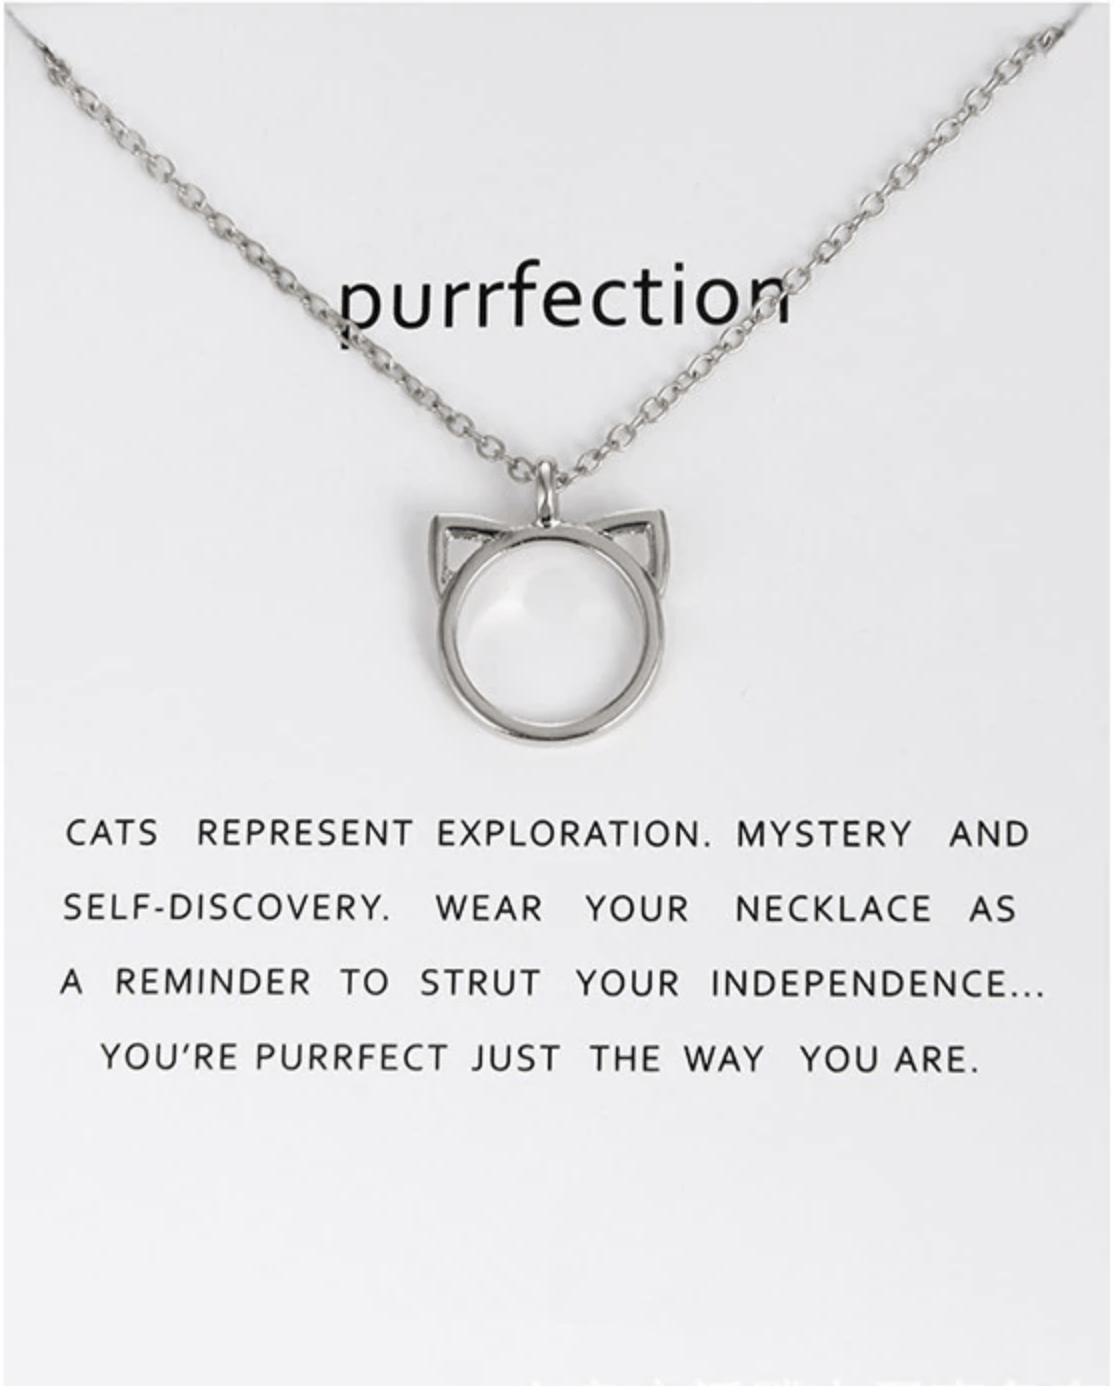 "Purrfection" Charm Necklace